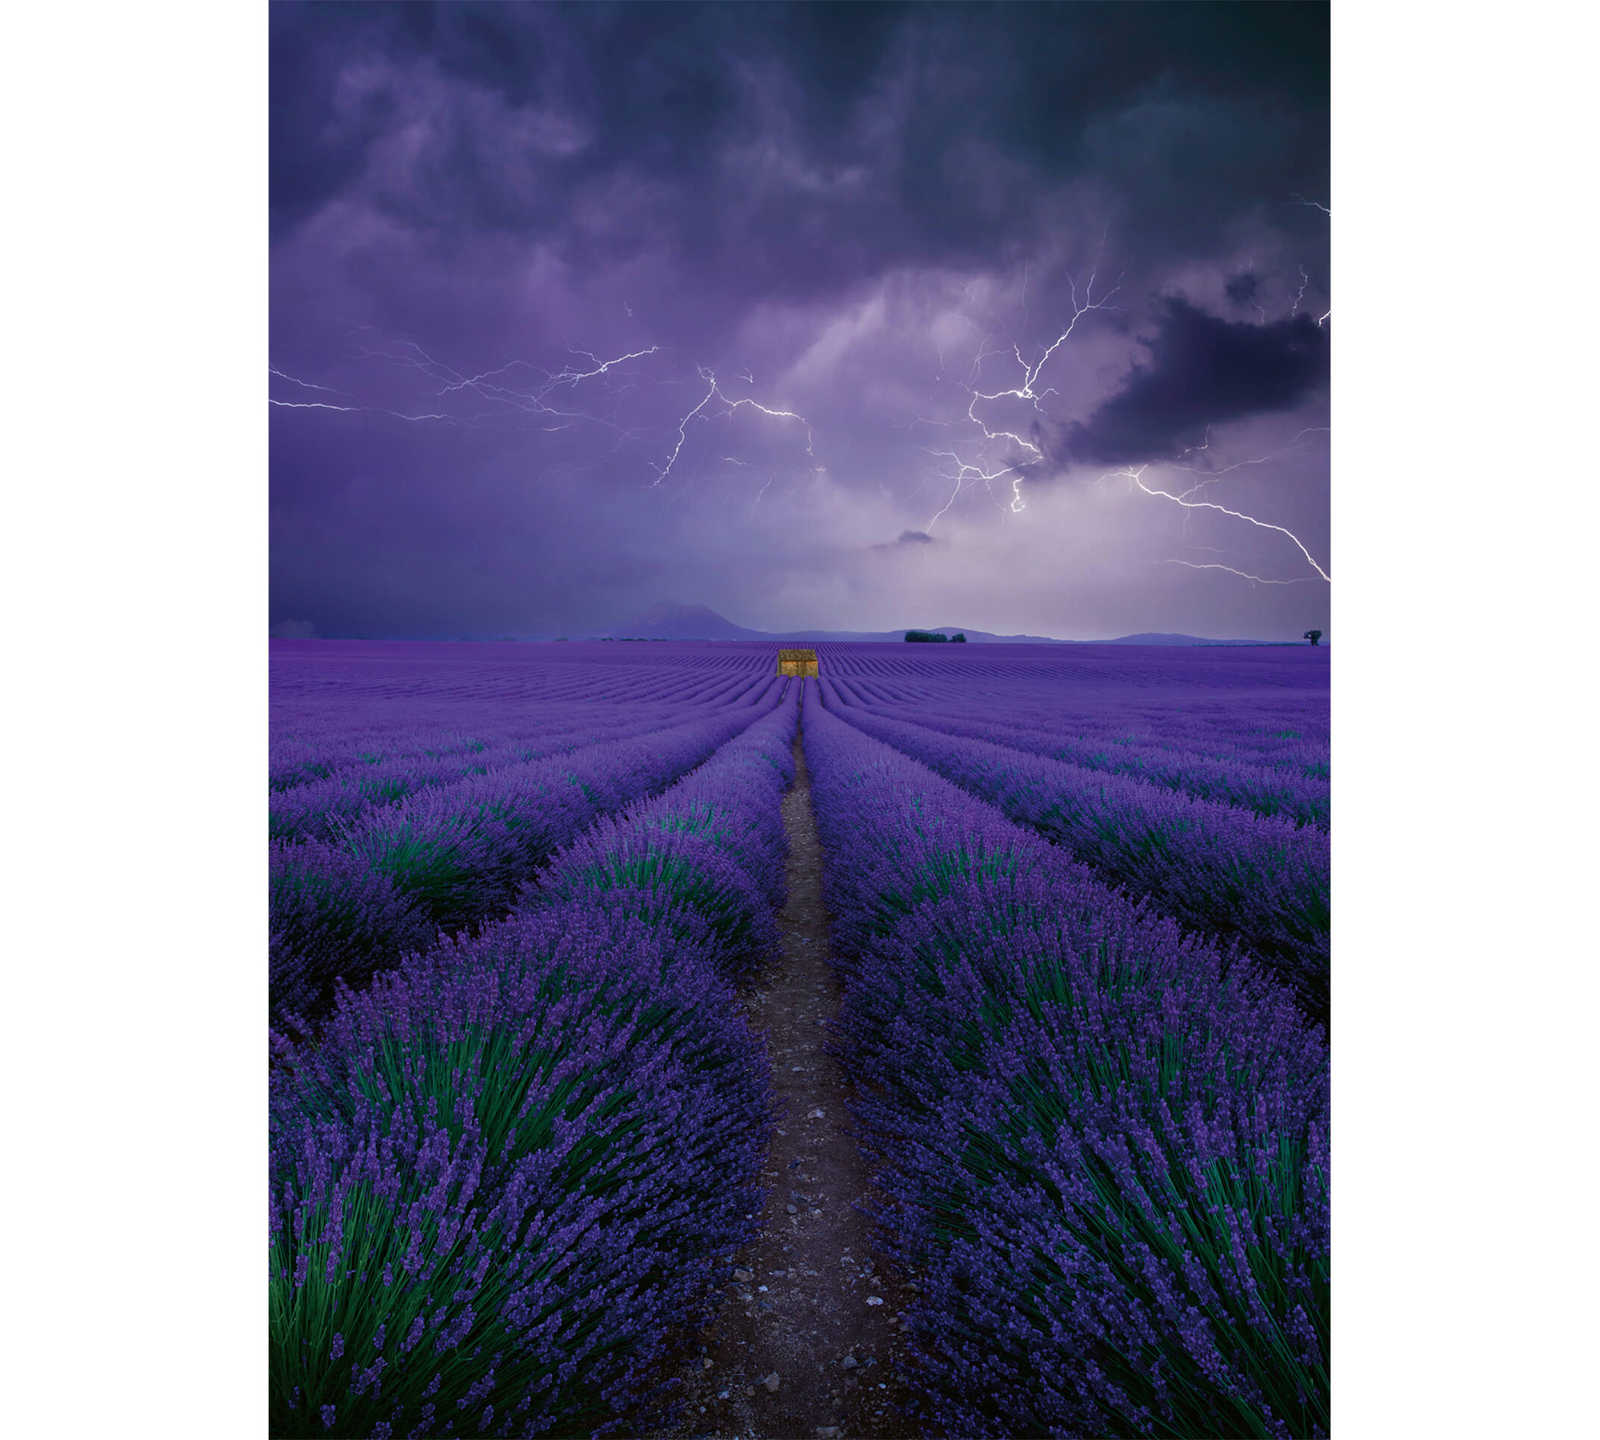         Photo wallpaper Field with lavender - purple, green, brown
    